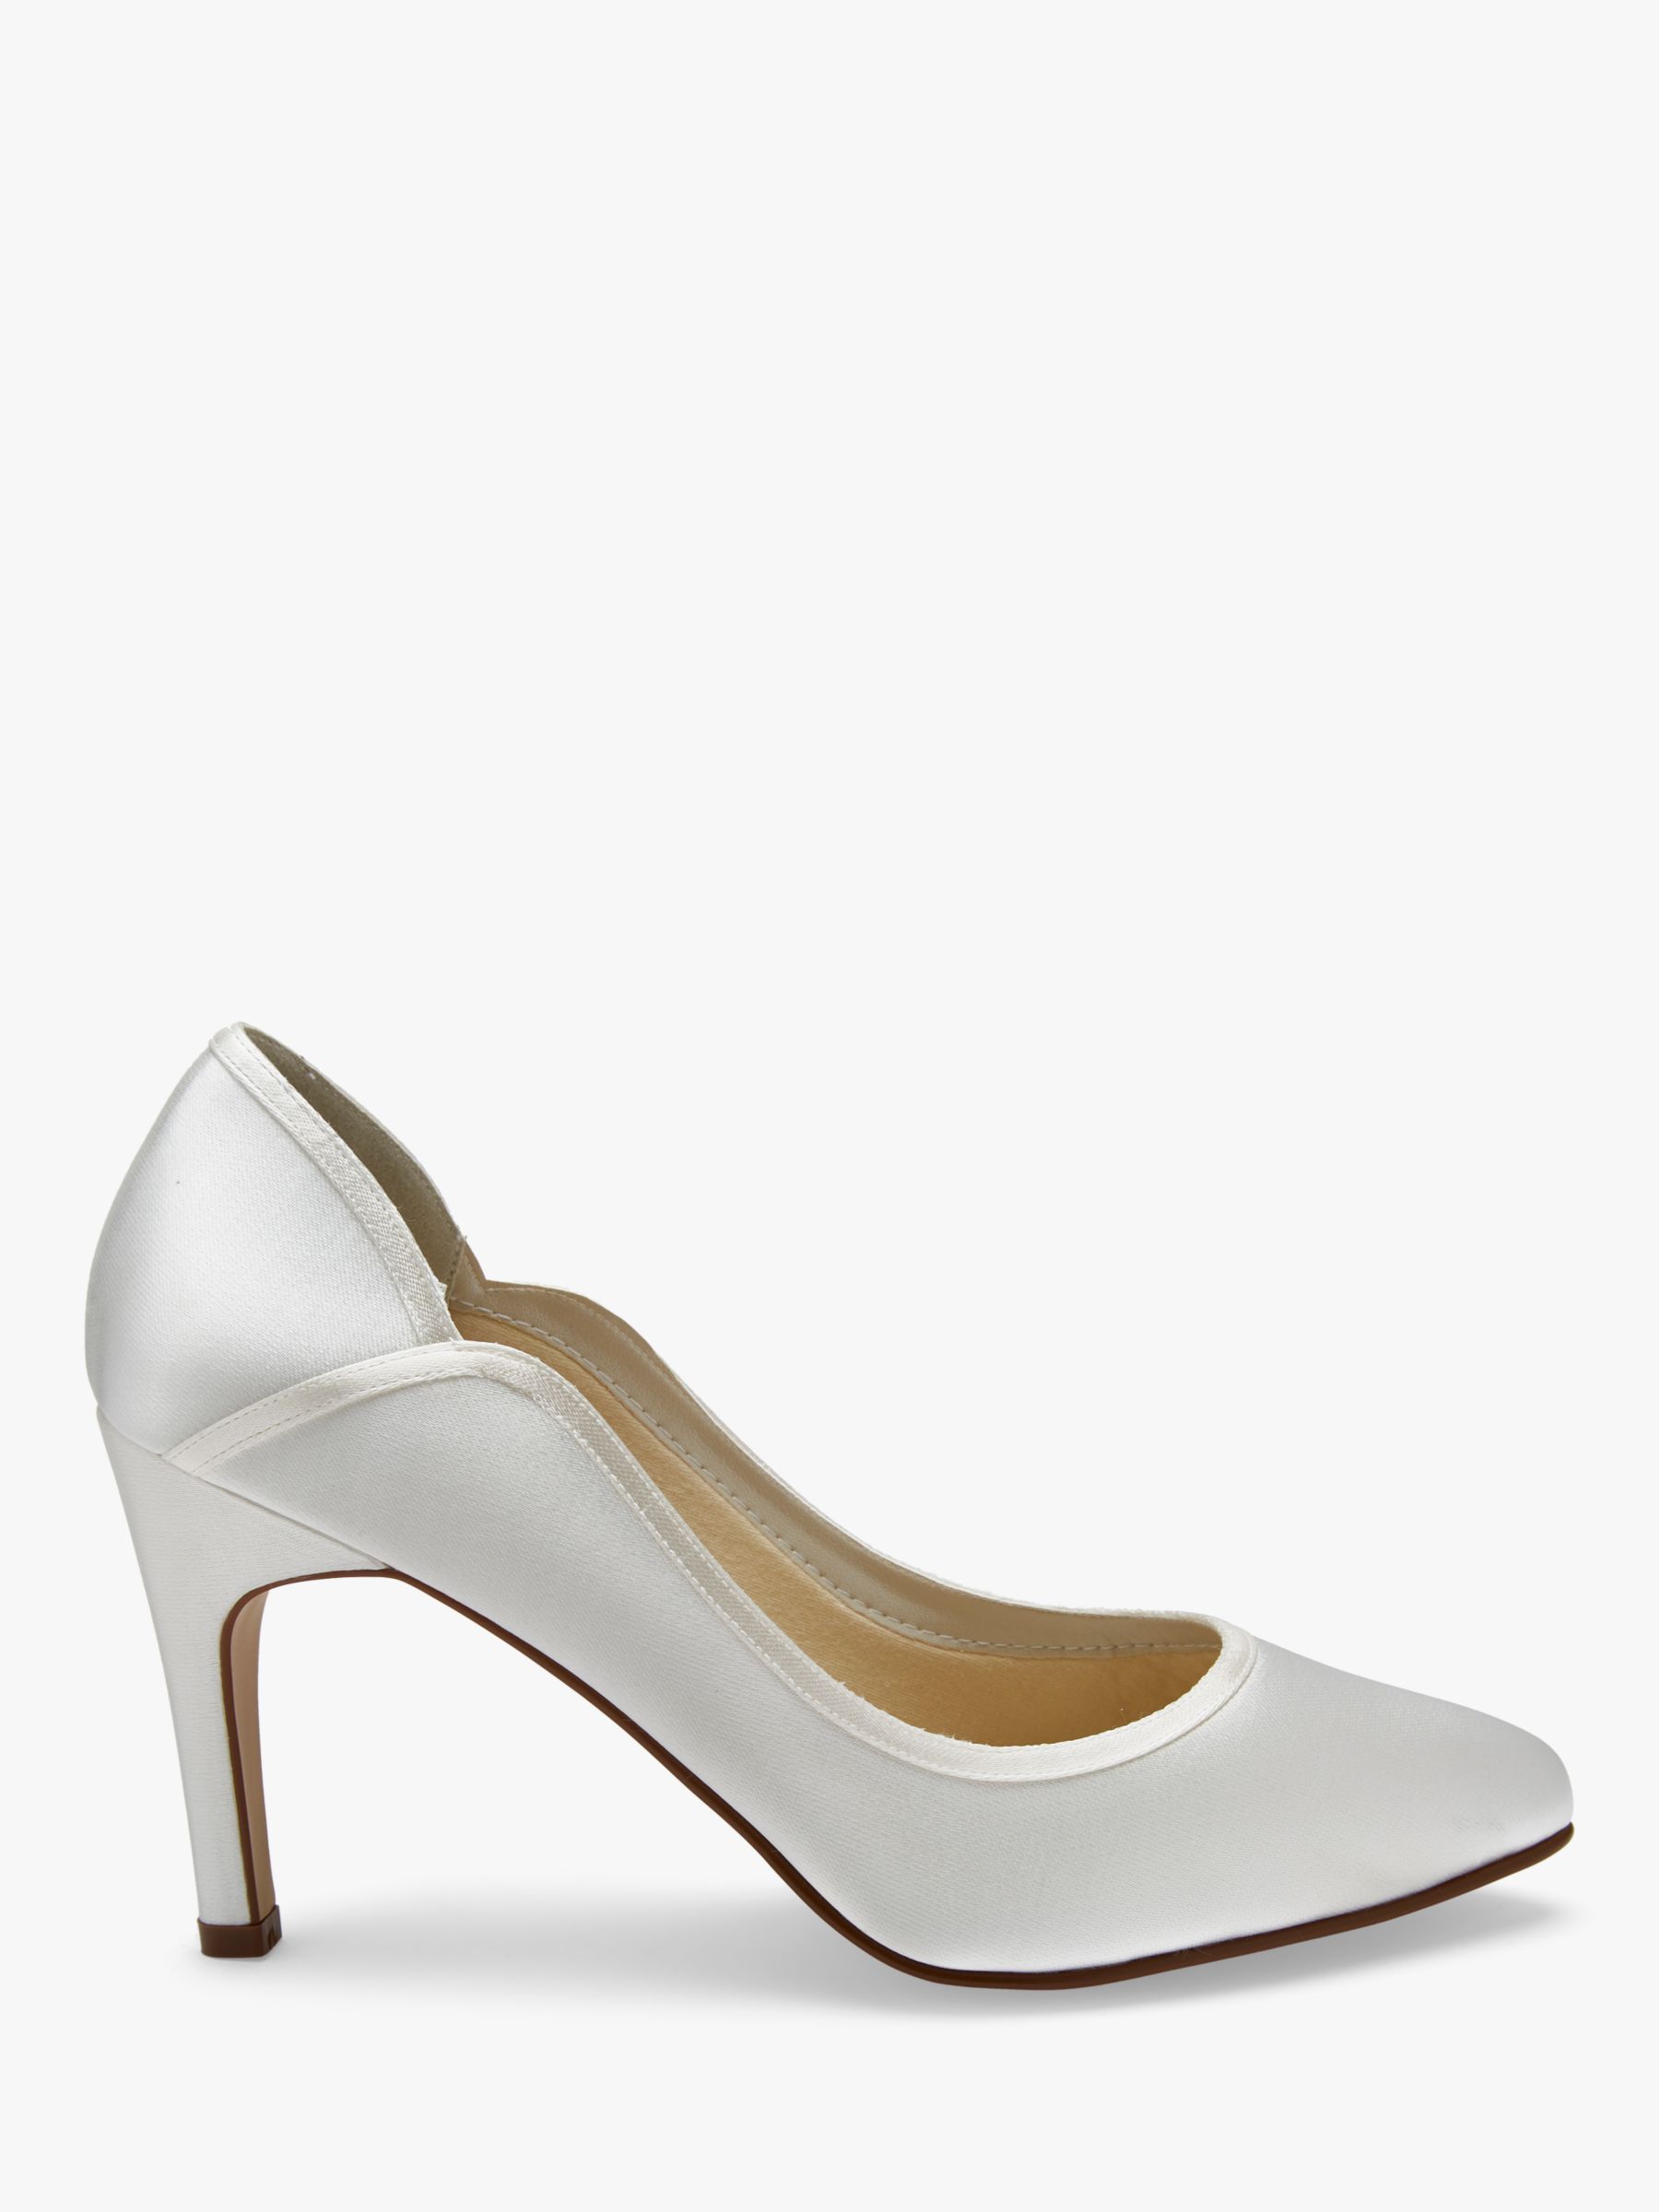 Rainbow Club Lucy Satin Court Shoes